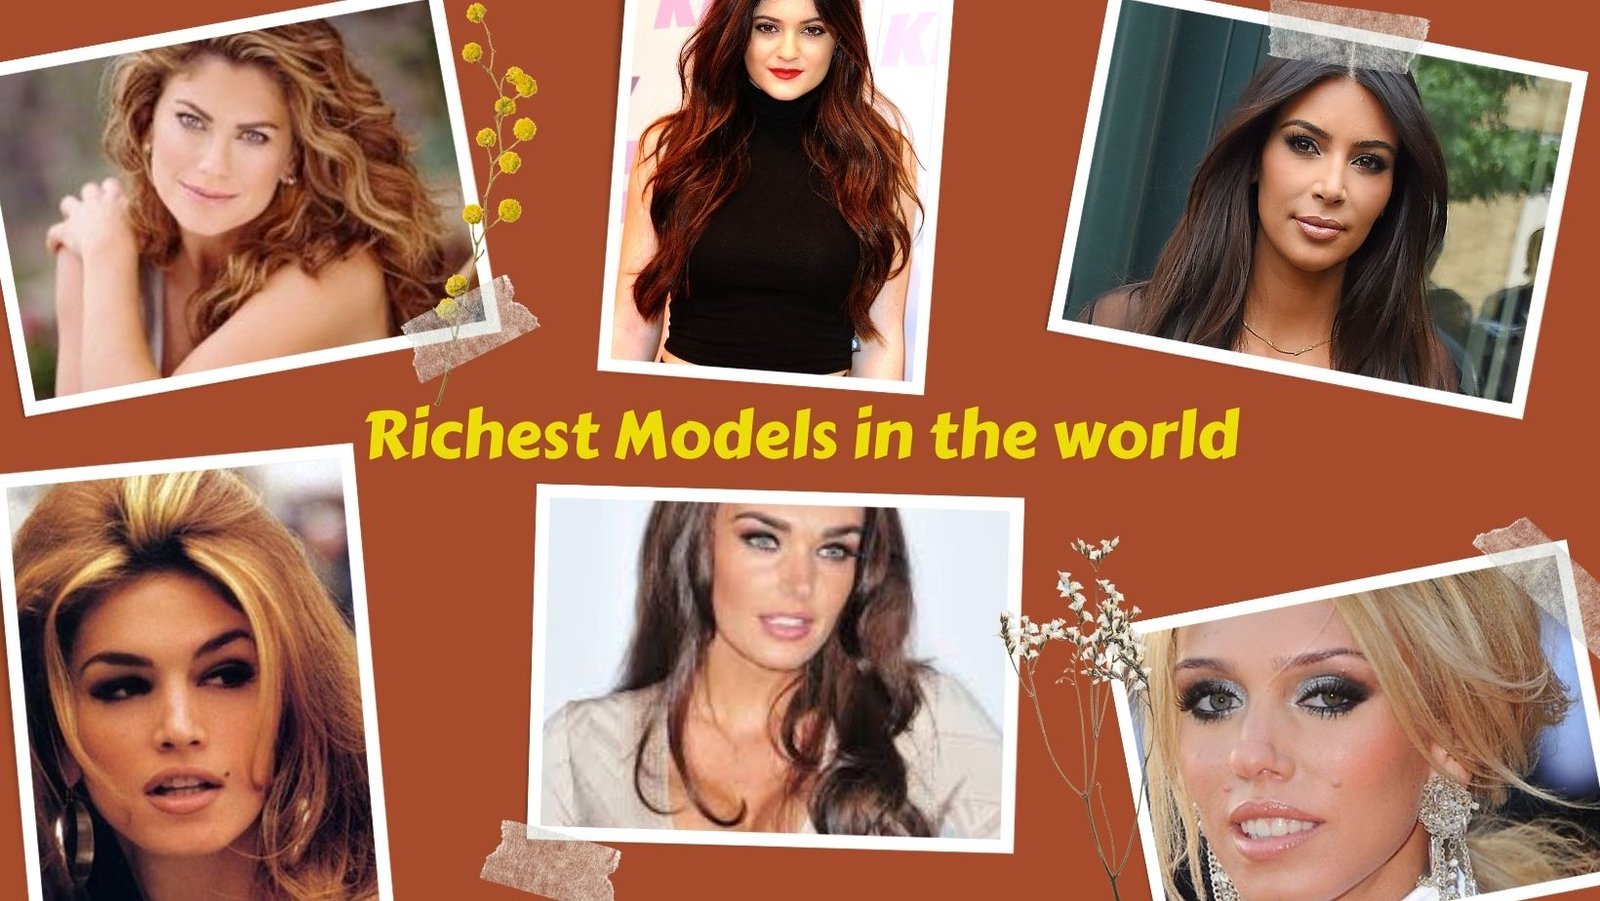 Richest Models in the world